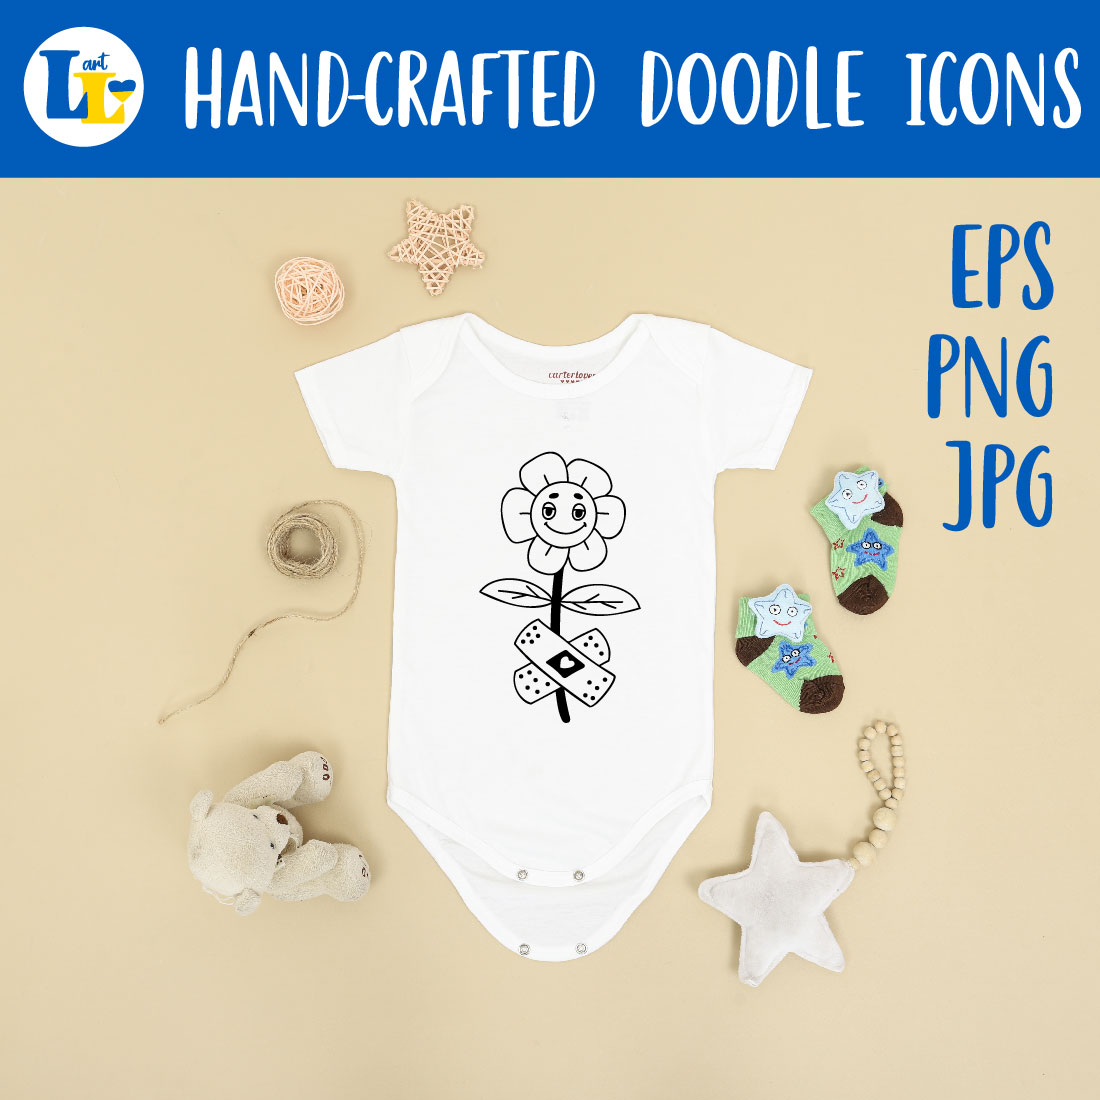 Retro Clipart, Groovy Elements. Hand Hand Drawn Doodle Icons baby.